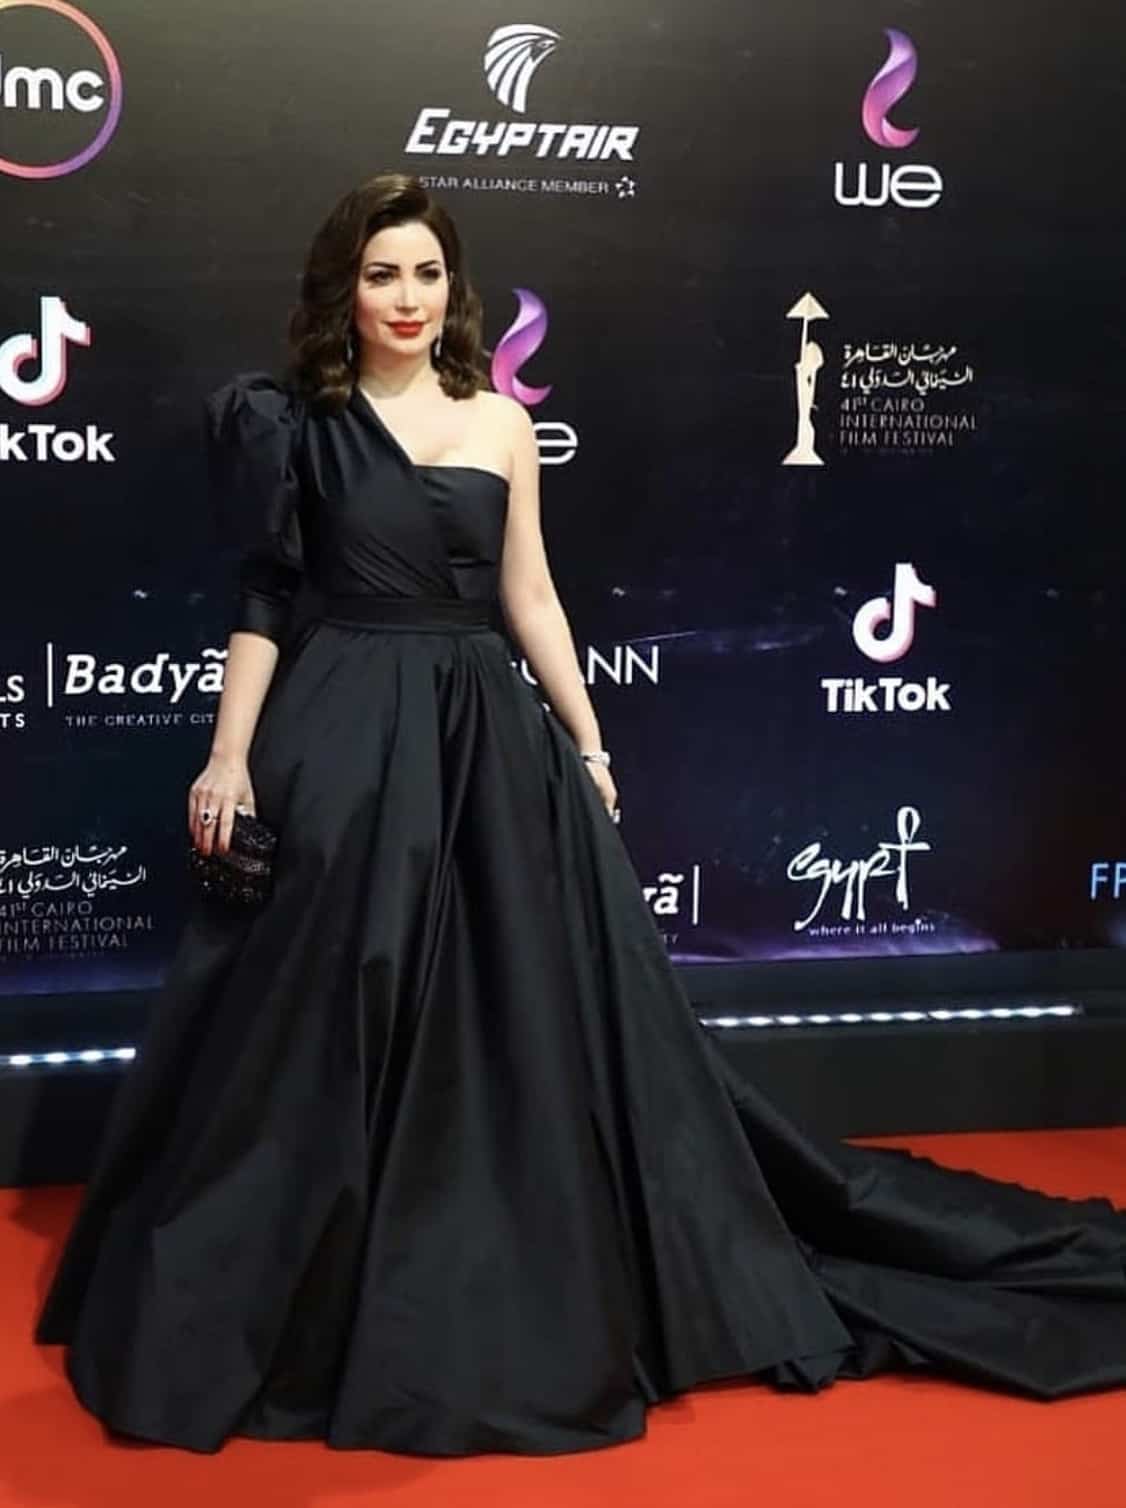 The most beautiful looks from the Cairo International Film Festival